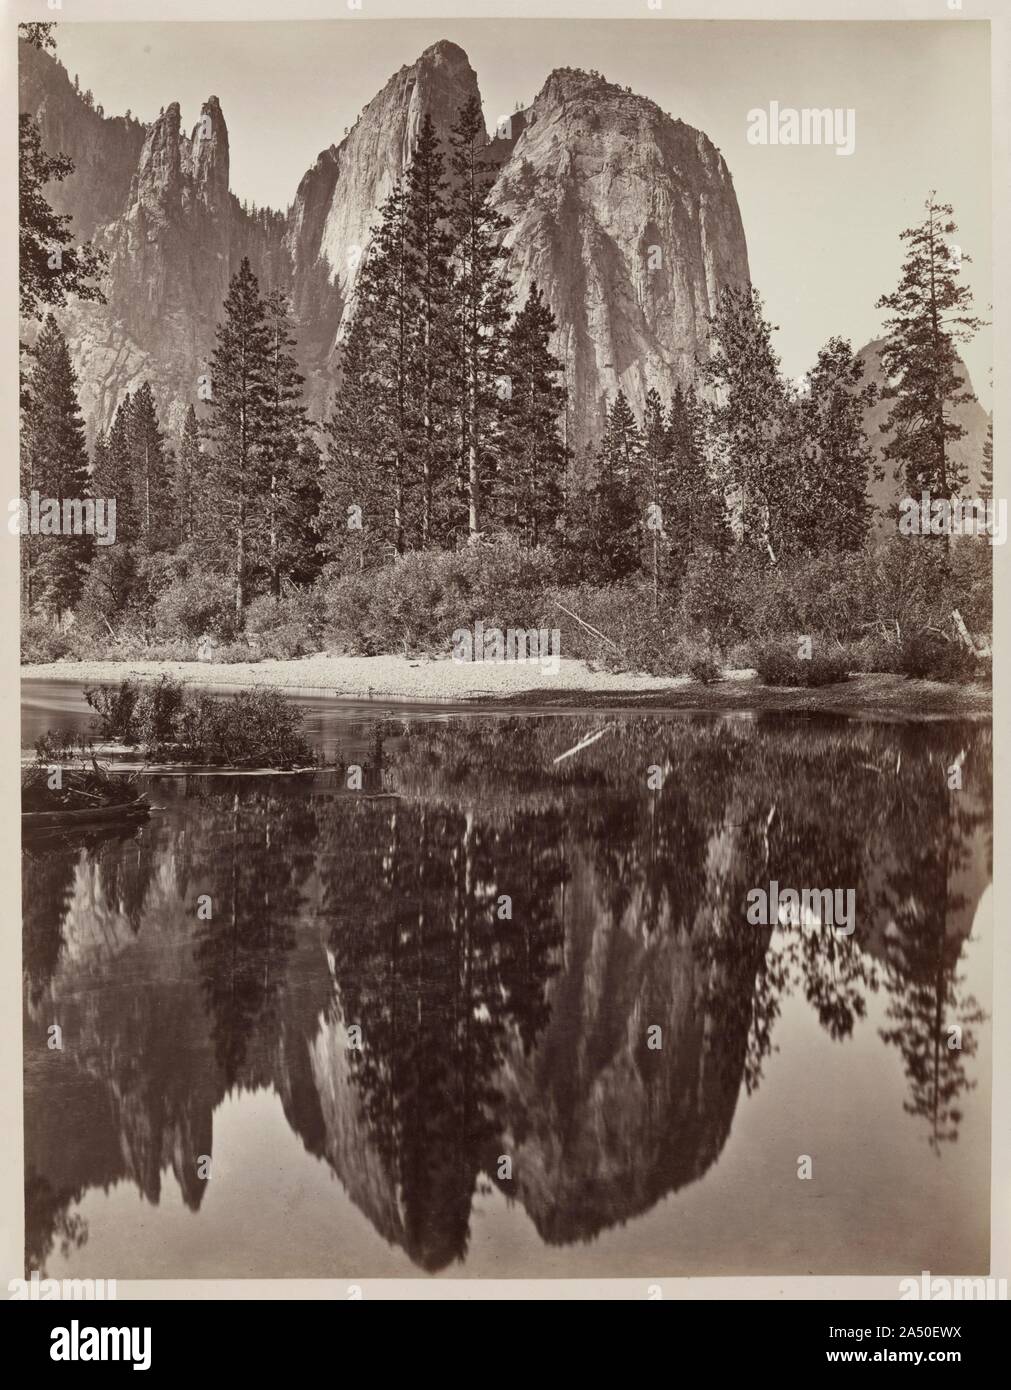 Cathedral Rocks and Reflections, Yosemite, 1864. In 1859, Charles L. Weed made the first photographs of the Yosemite region. Using the wet collodion process, he produced 40 stereoviews and some 20 large (10 x 14 inches) glass negatives. His pioneering photographs informed future visitors and artists of the region's scenic splendors. About five years later, in 1864, he returned to create his remarkable mammoth plate views (approximately 17 x 22 inches) of the valley. This image of Cathedral Rocks is among the best examples of Weed's ability to combine sublime subject matter with observation. Wi Stock Photo